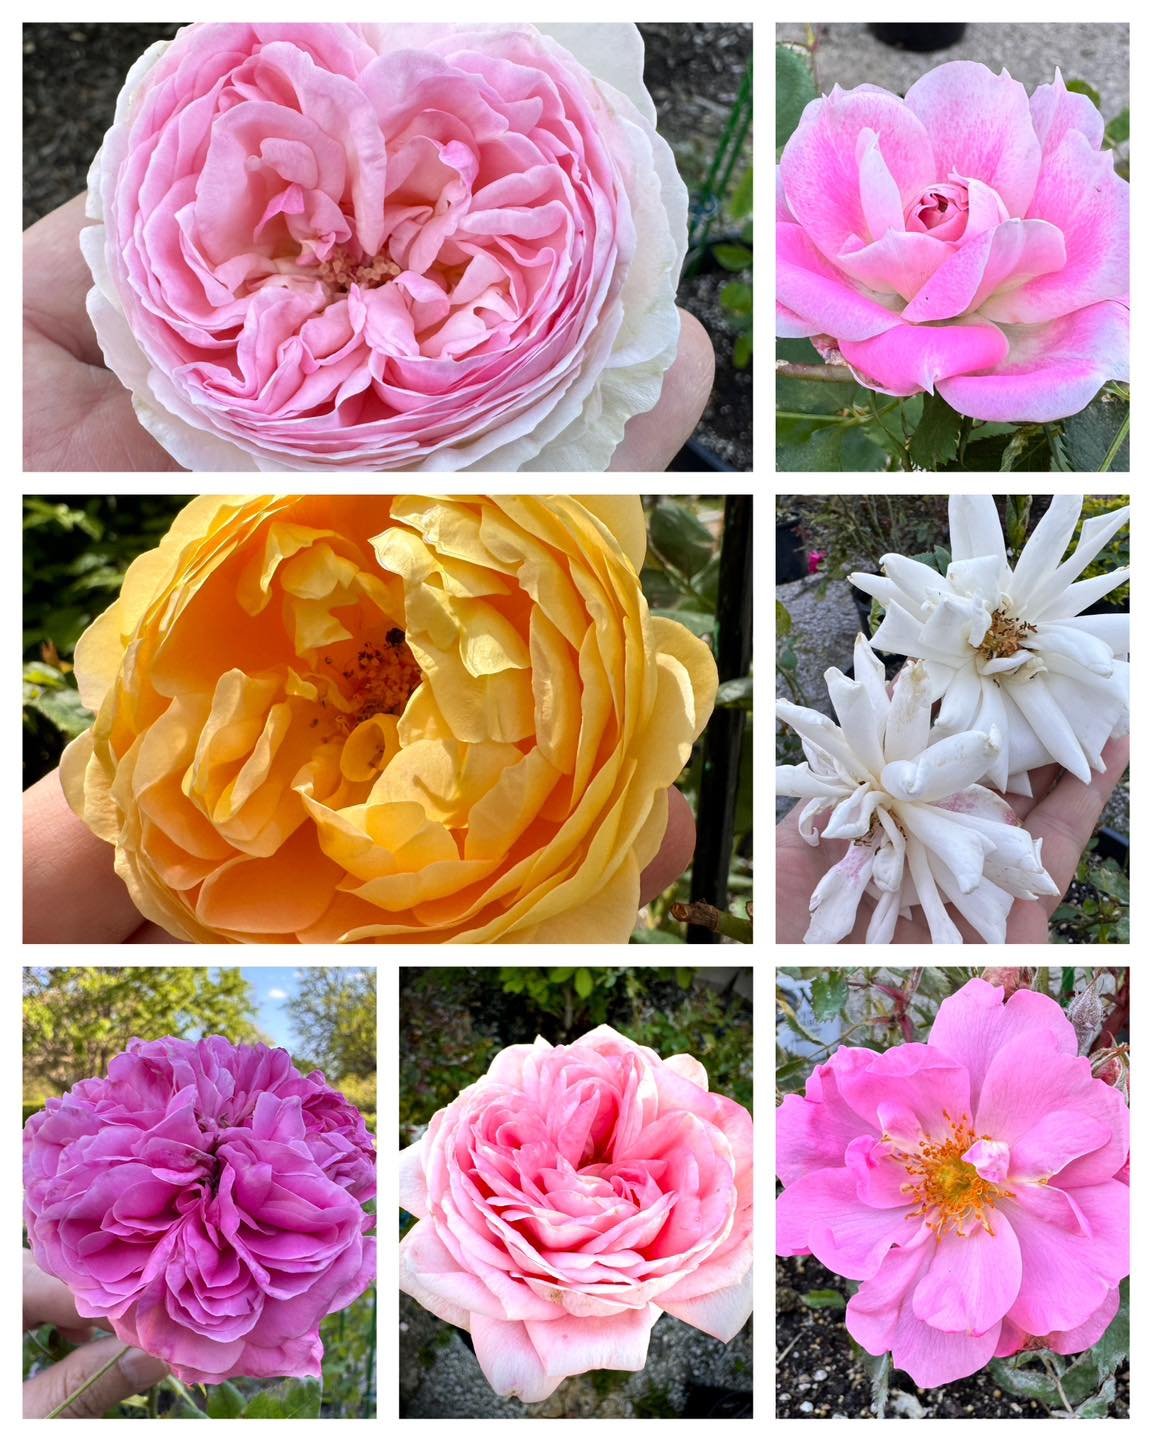 Here are just a handful (pun intended) of the fragrant heirloom roses that were overwintered in pots in the veranda last year that will soon be planted in the future formal tea rose garden.

#rose #roses